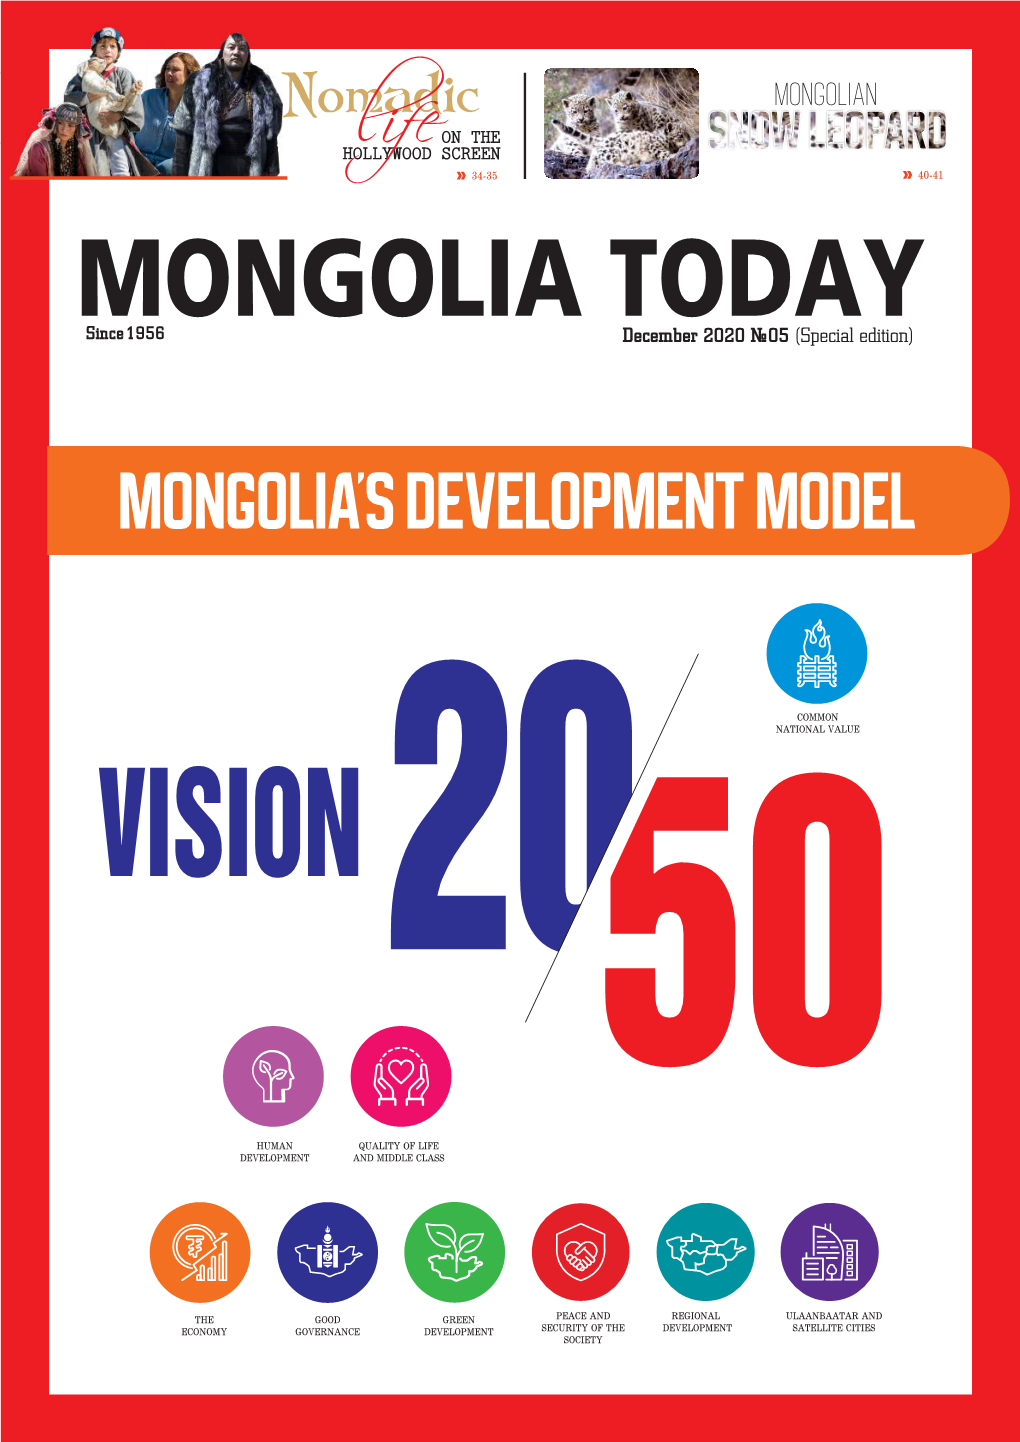 MONGOLIA TODAY Since 1956 December 2020 №05 (Special Edition)